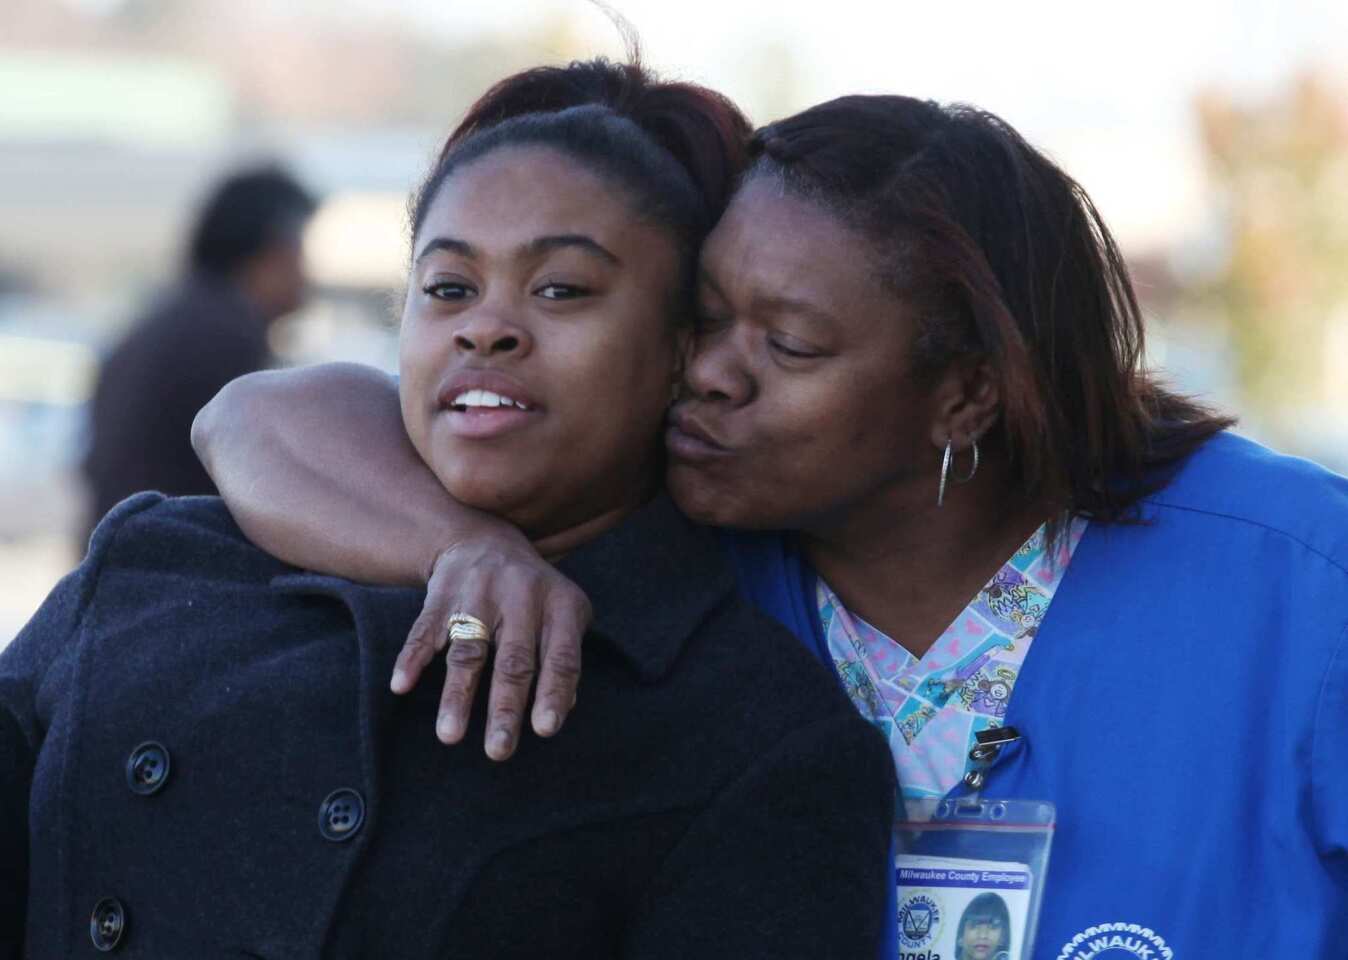 Mother and daughter at the scene